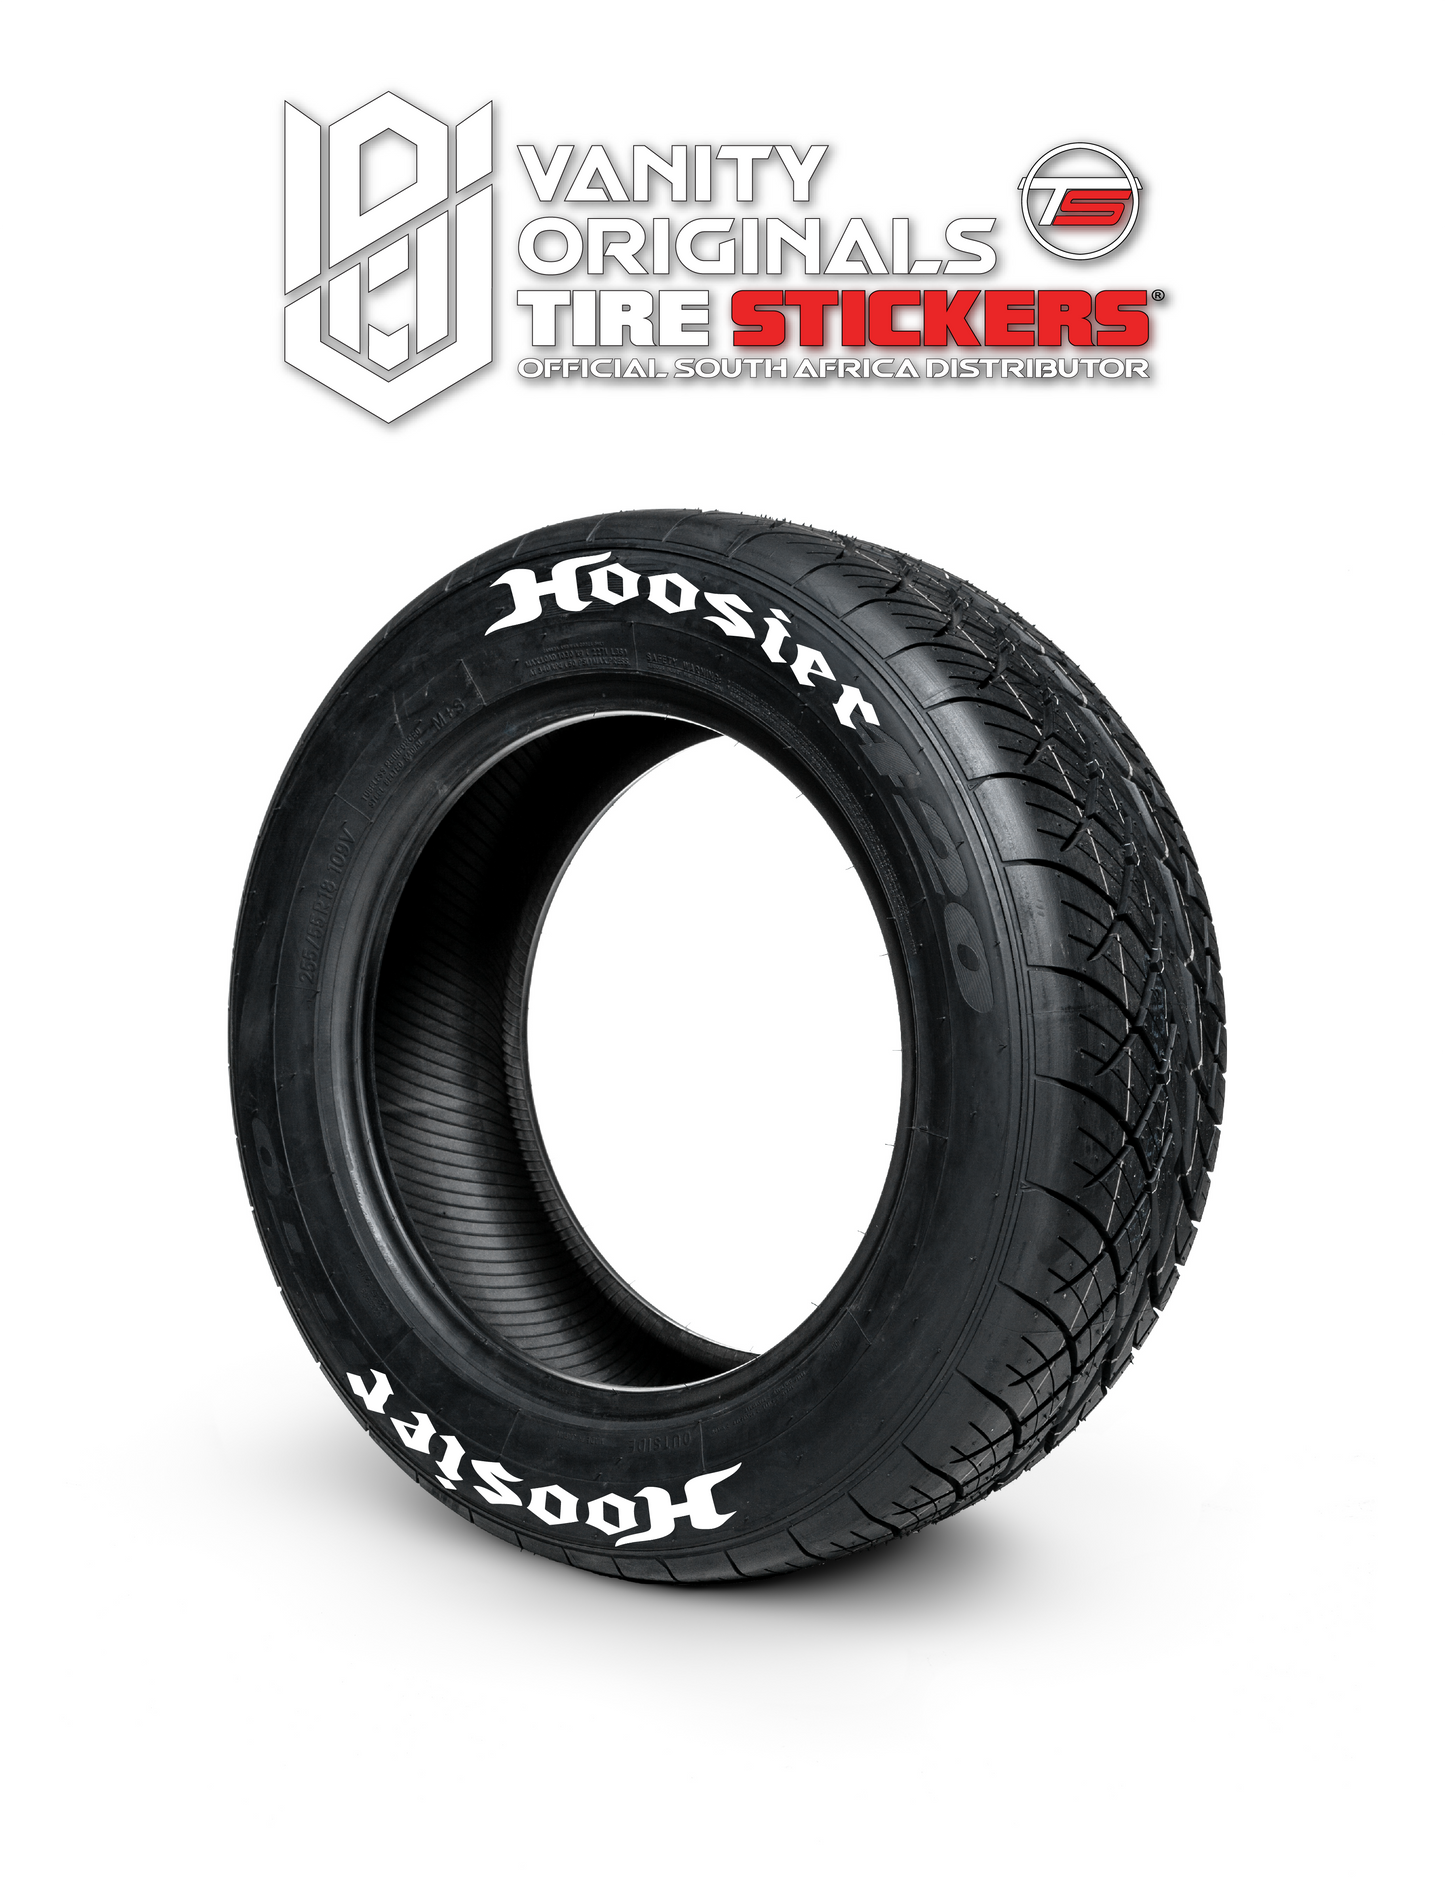 Hoosier ( 8x Rubber Decals, Adhesive & Instructions Included )